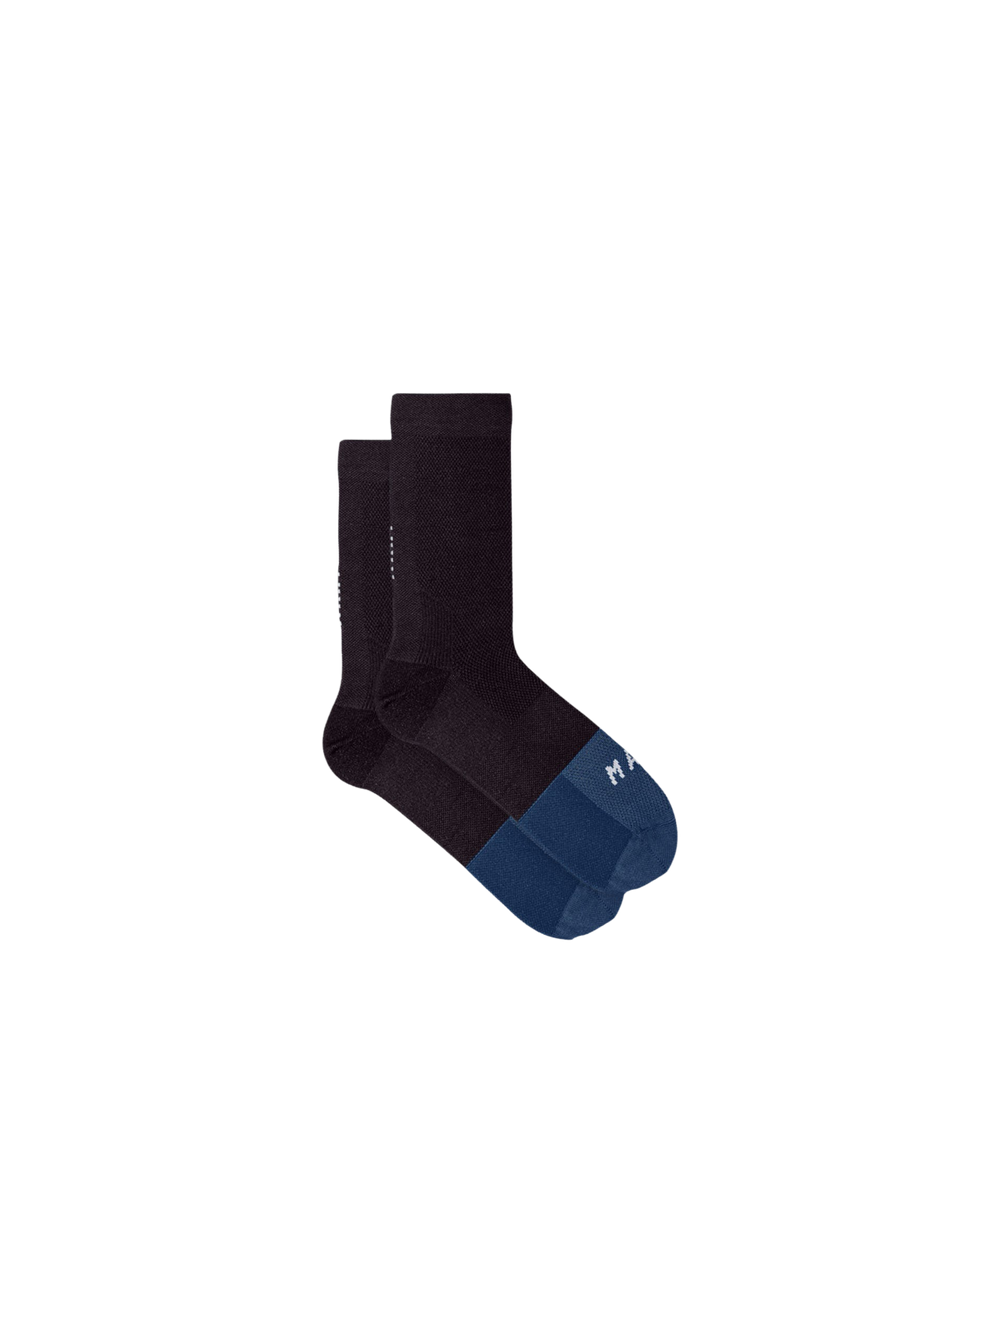 Product Image for Division Sock